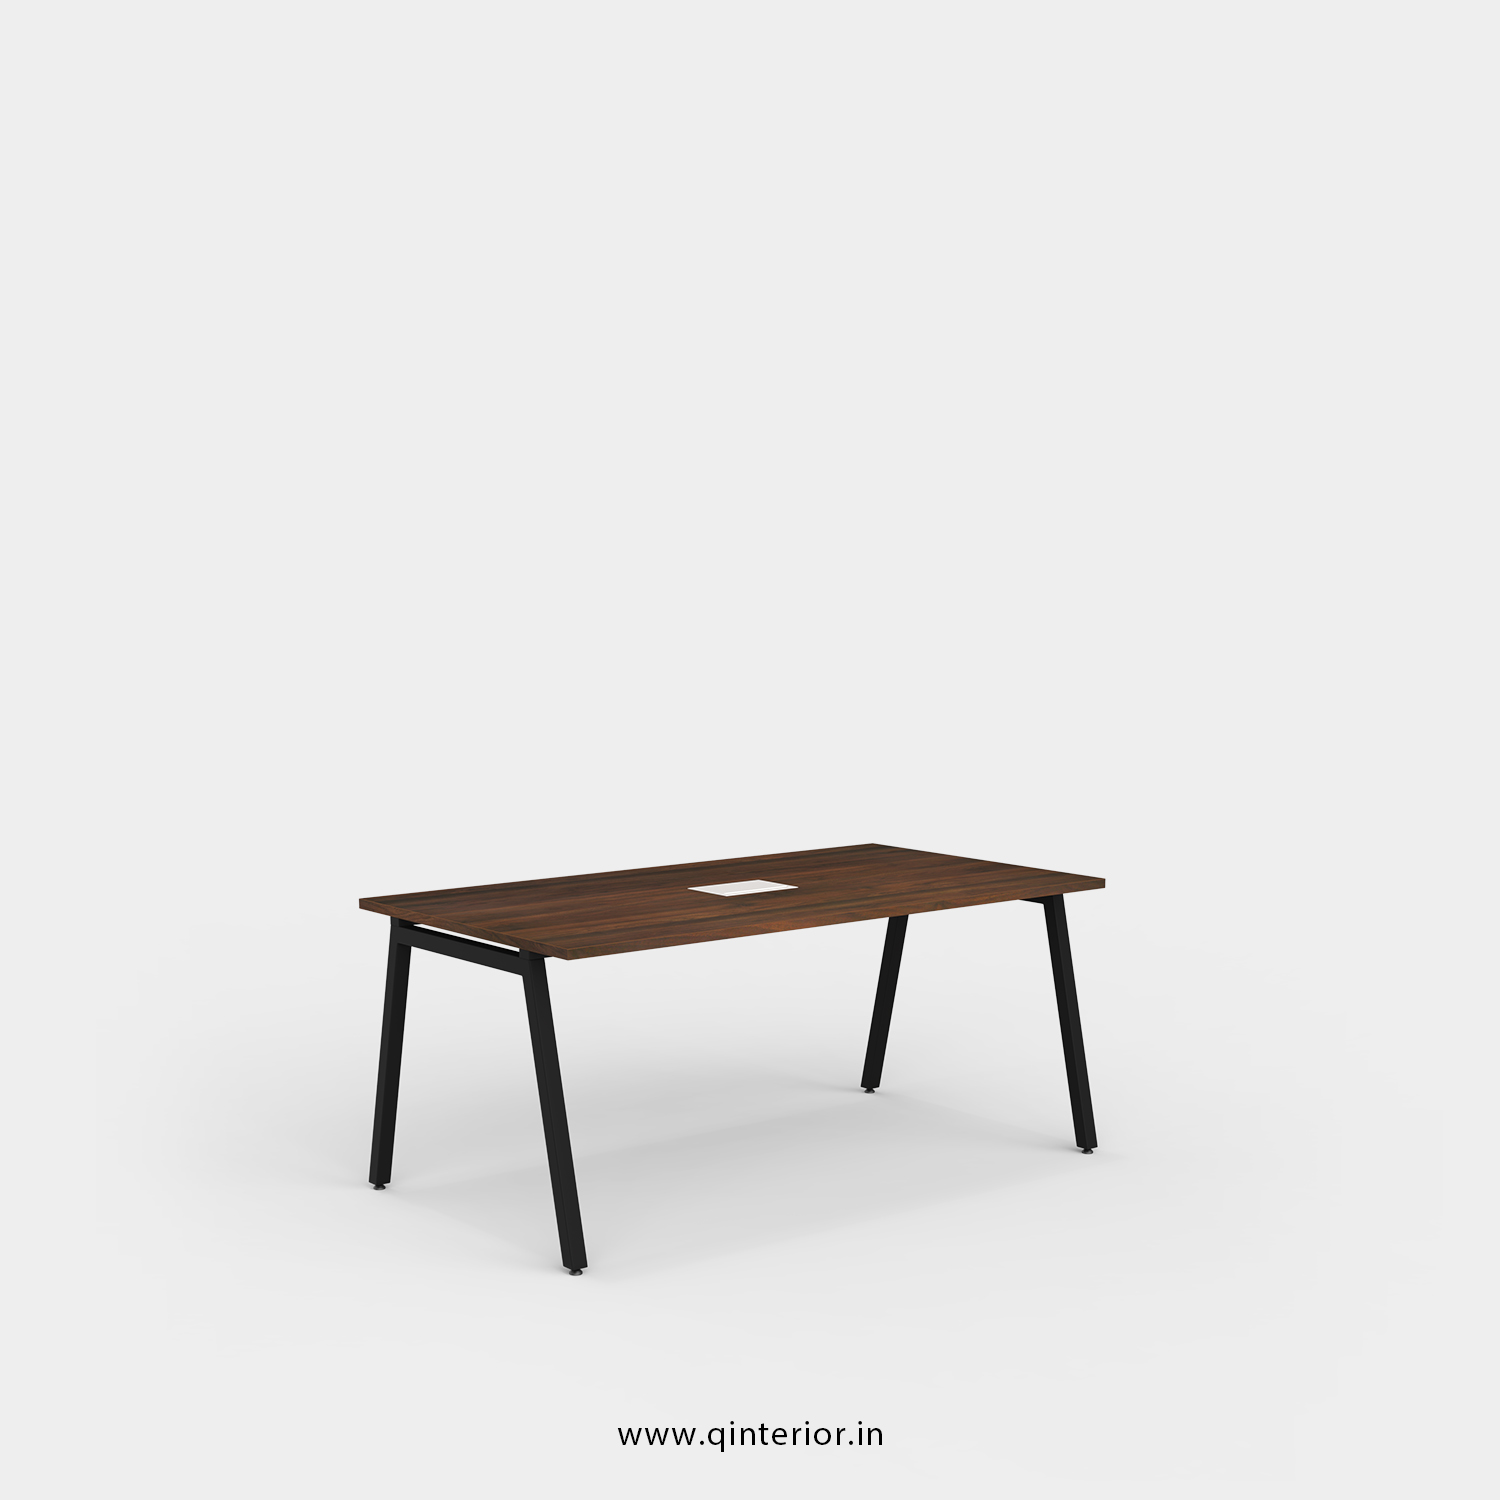 Berg Meeting Table in Walnut Finish – OMT001 C1